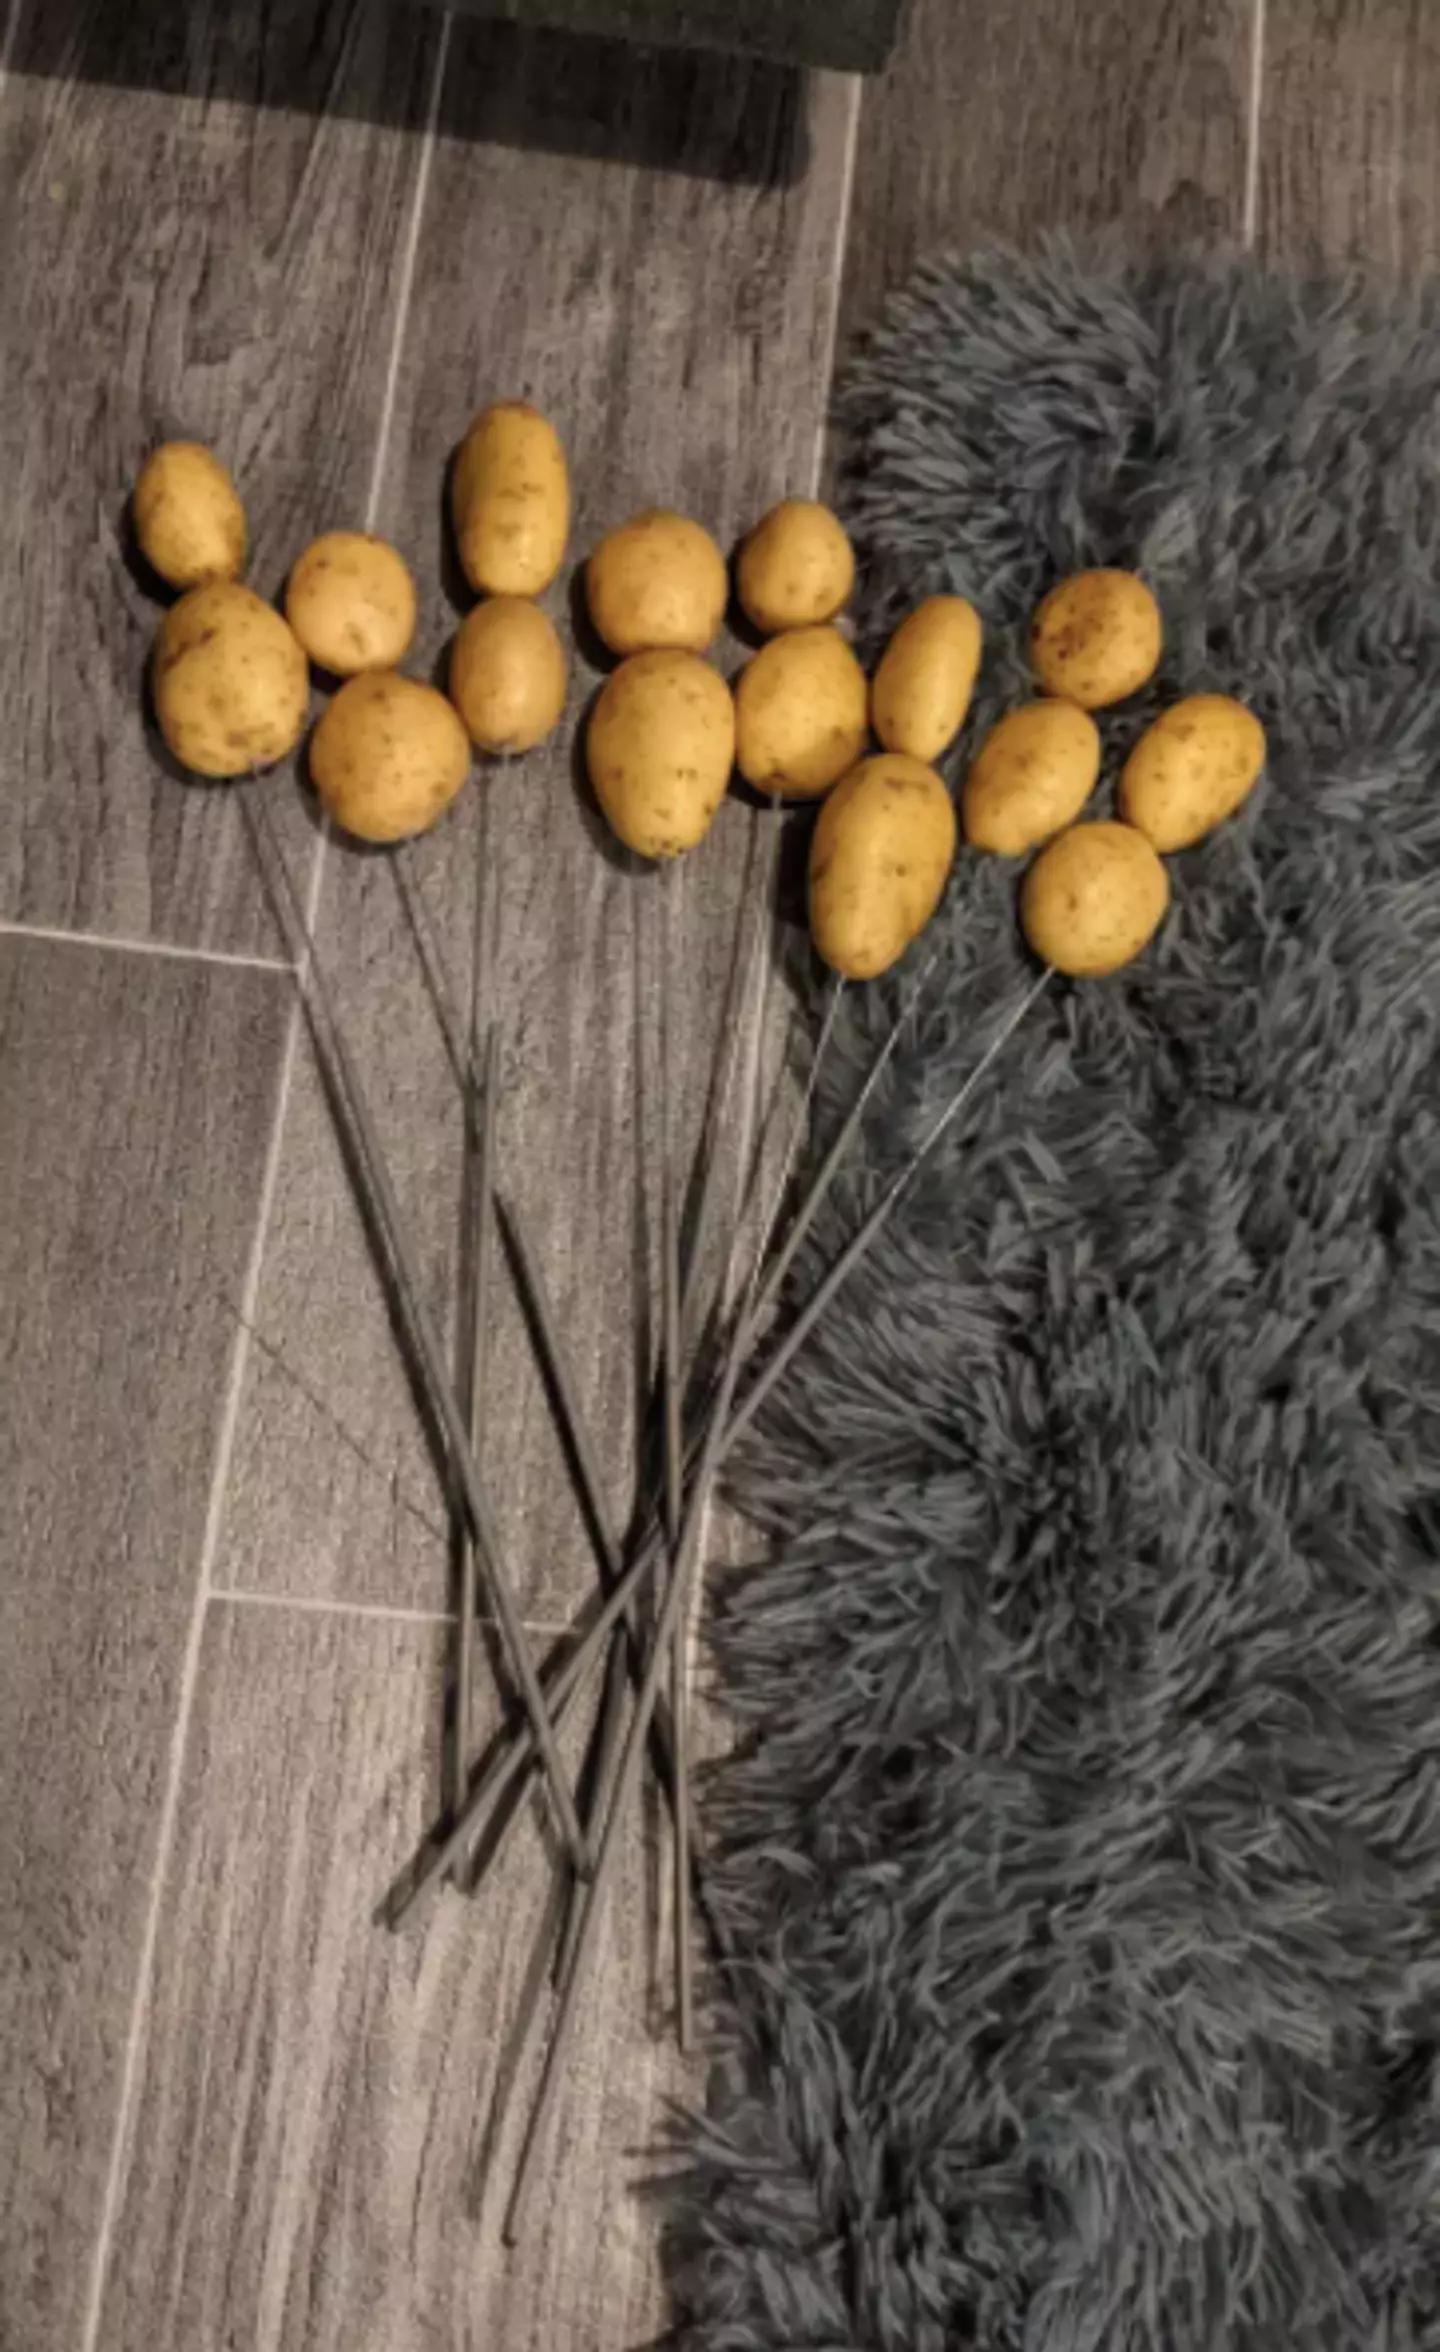 The potato hack went down a treat on Facebook (